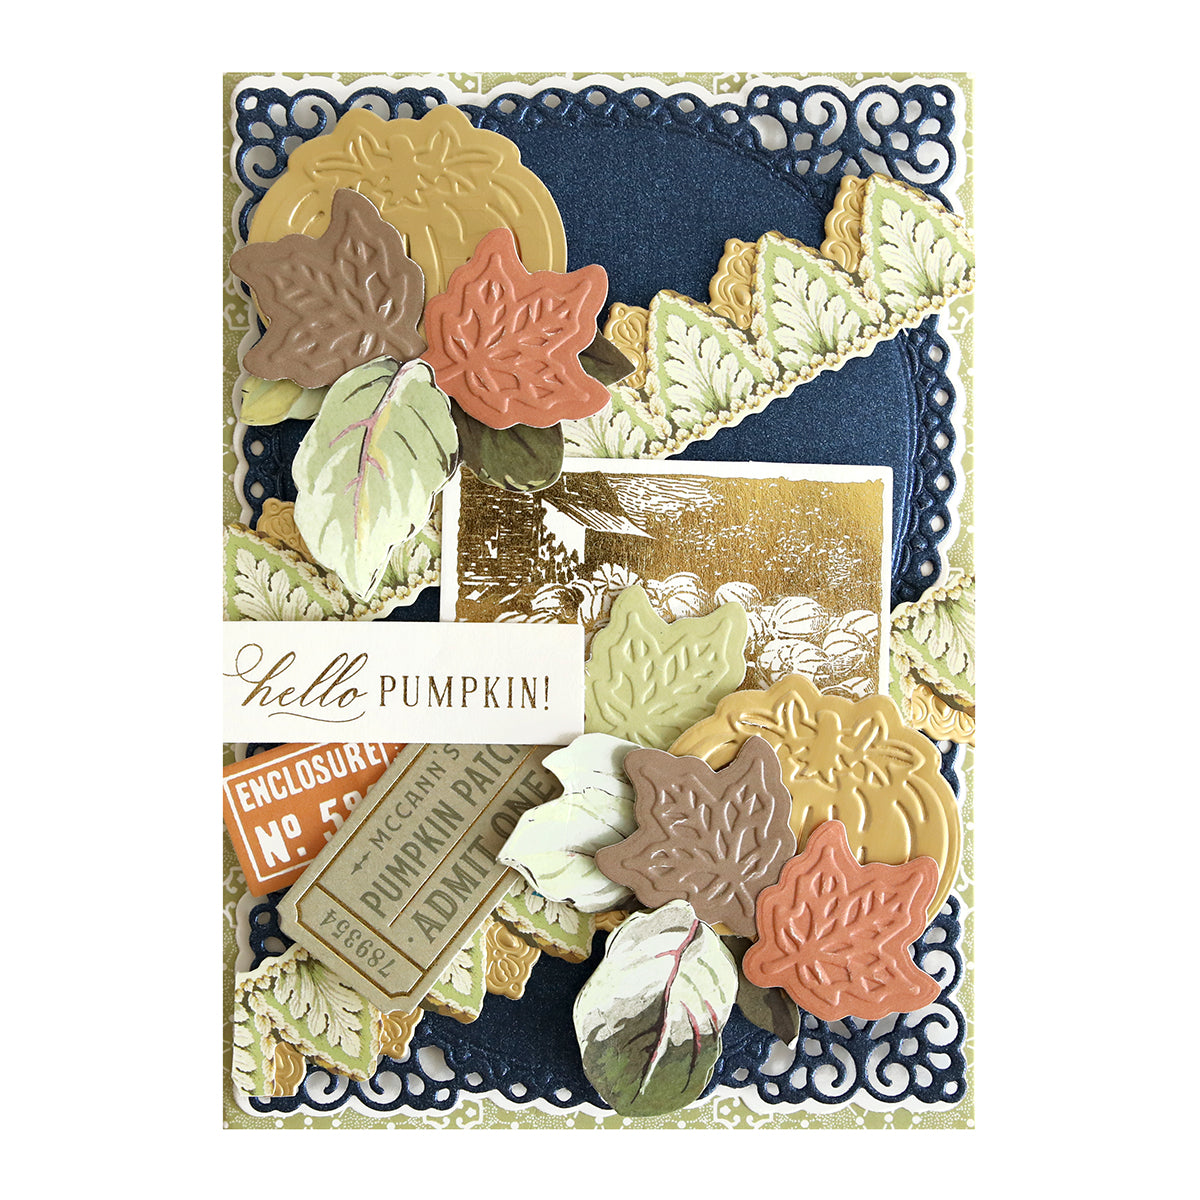 Anna Griffin - hello pumpkin stamp set for card making using Anna Griffin Navy Metallic cardstock and diecutting techniques.